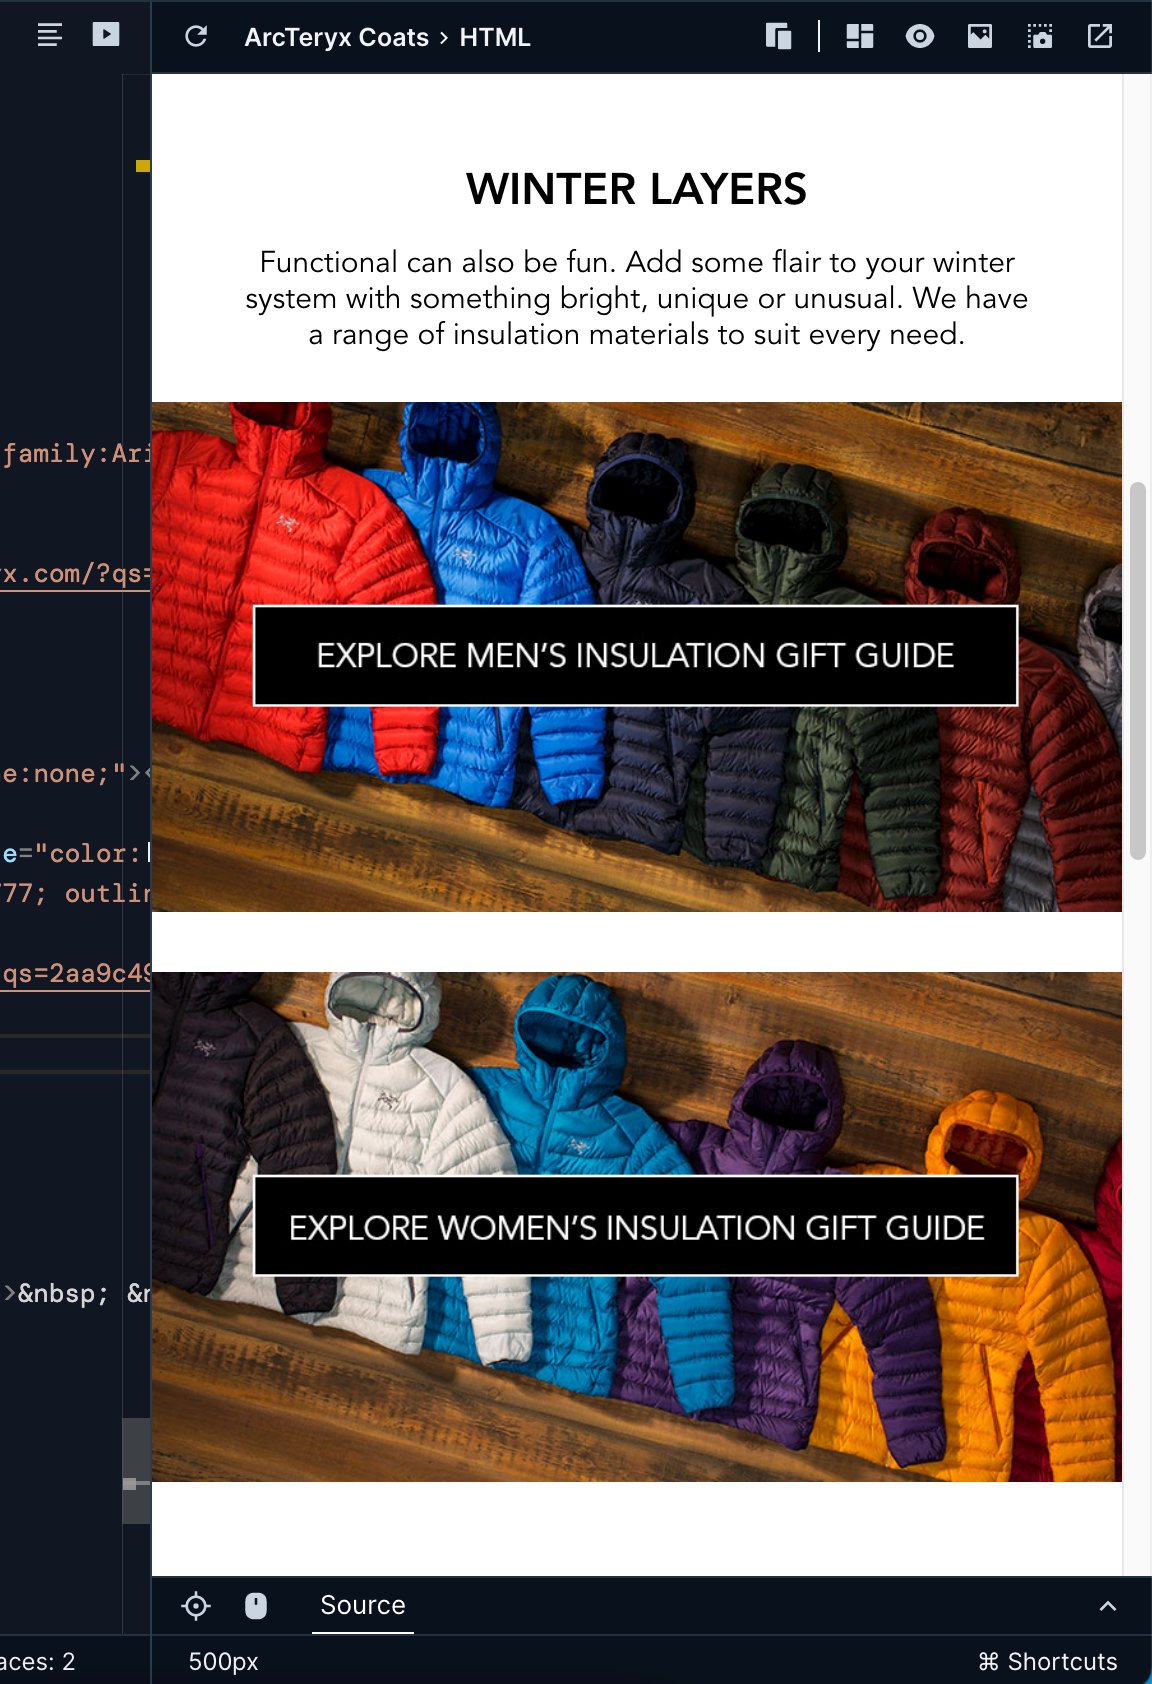 Up close image of the preview, showing an email advertising winter jackets. There is some text at the top describing the jackets, and then two photos below. The first photo contains 6 jackets, which are red, blue, dark blue, greenish grey, dark red and gray. The second photo contains an additional 6 jackets, colored black, white, blue, purple, orange, and red.